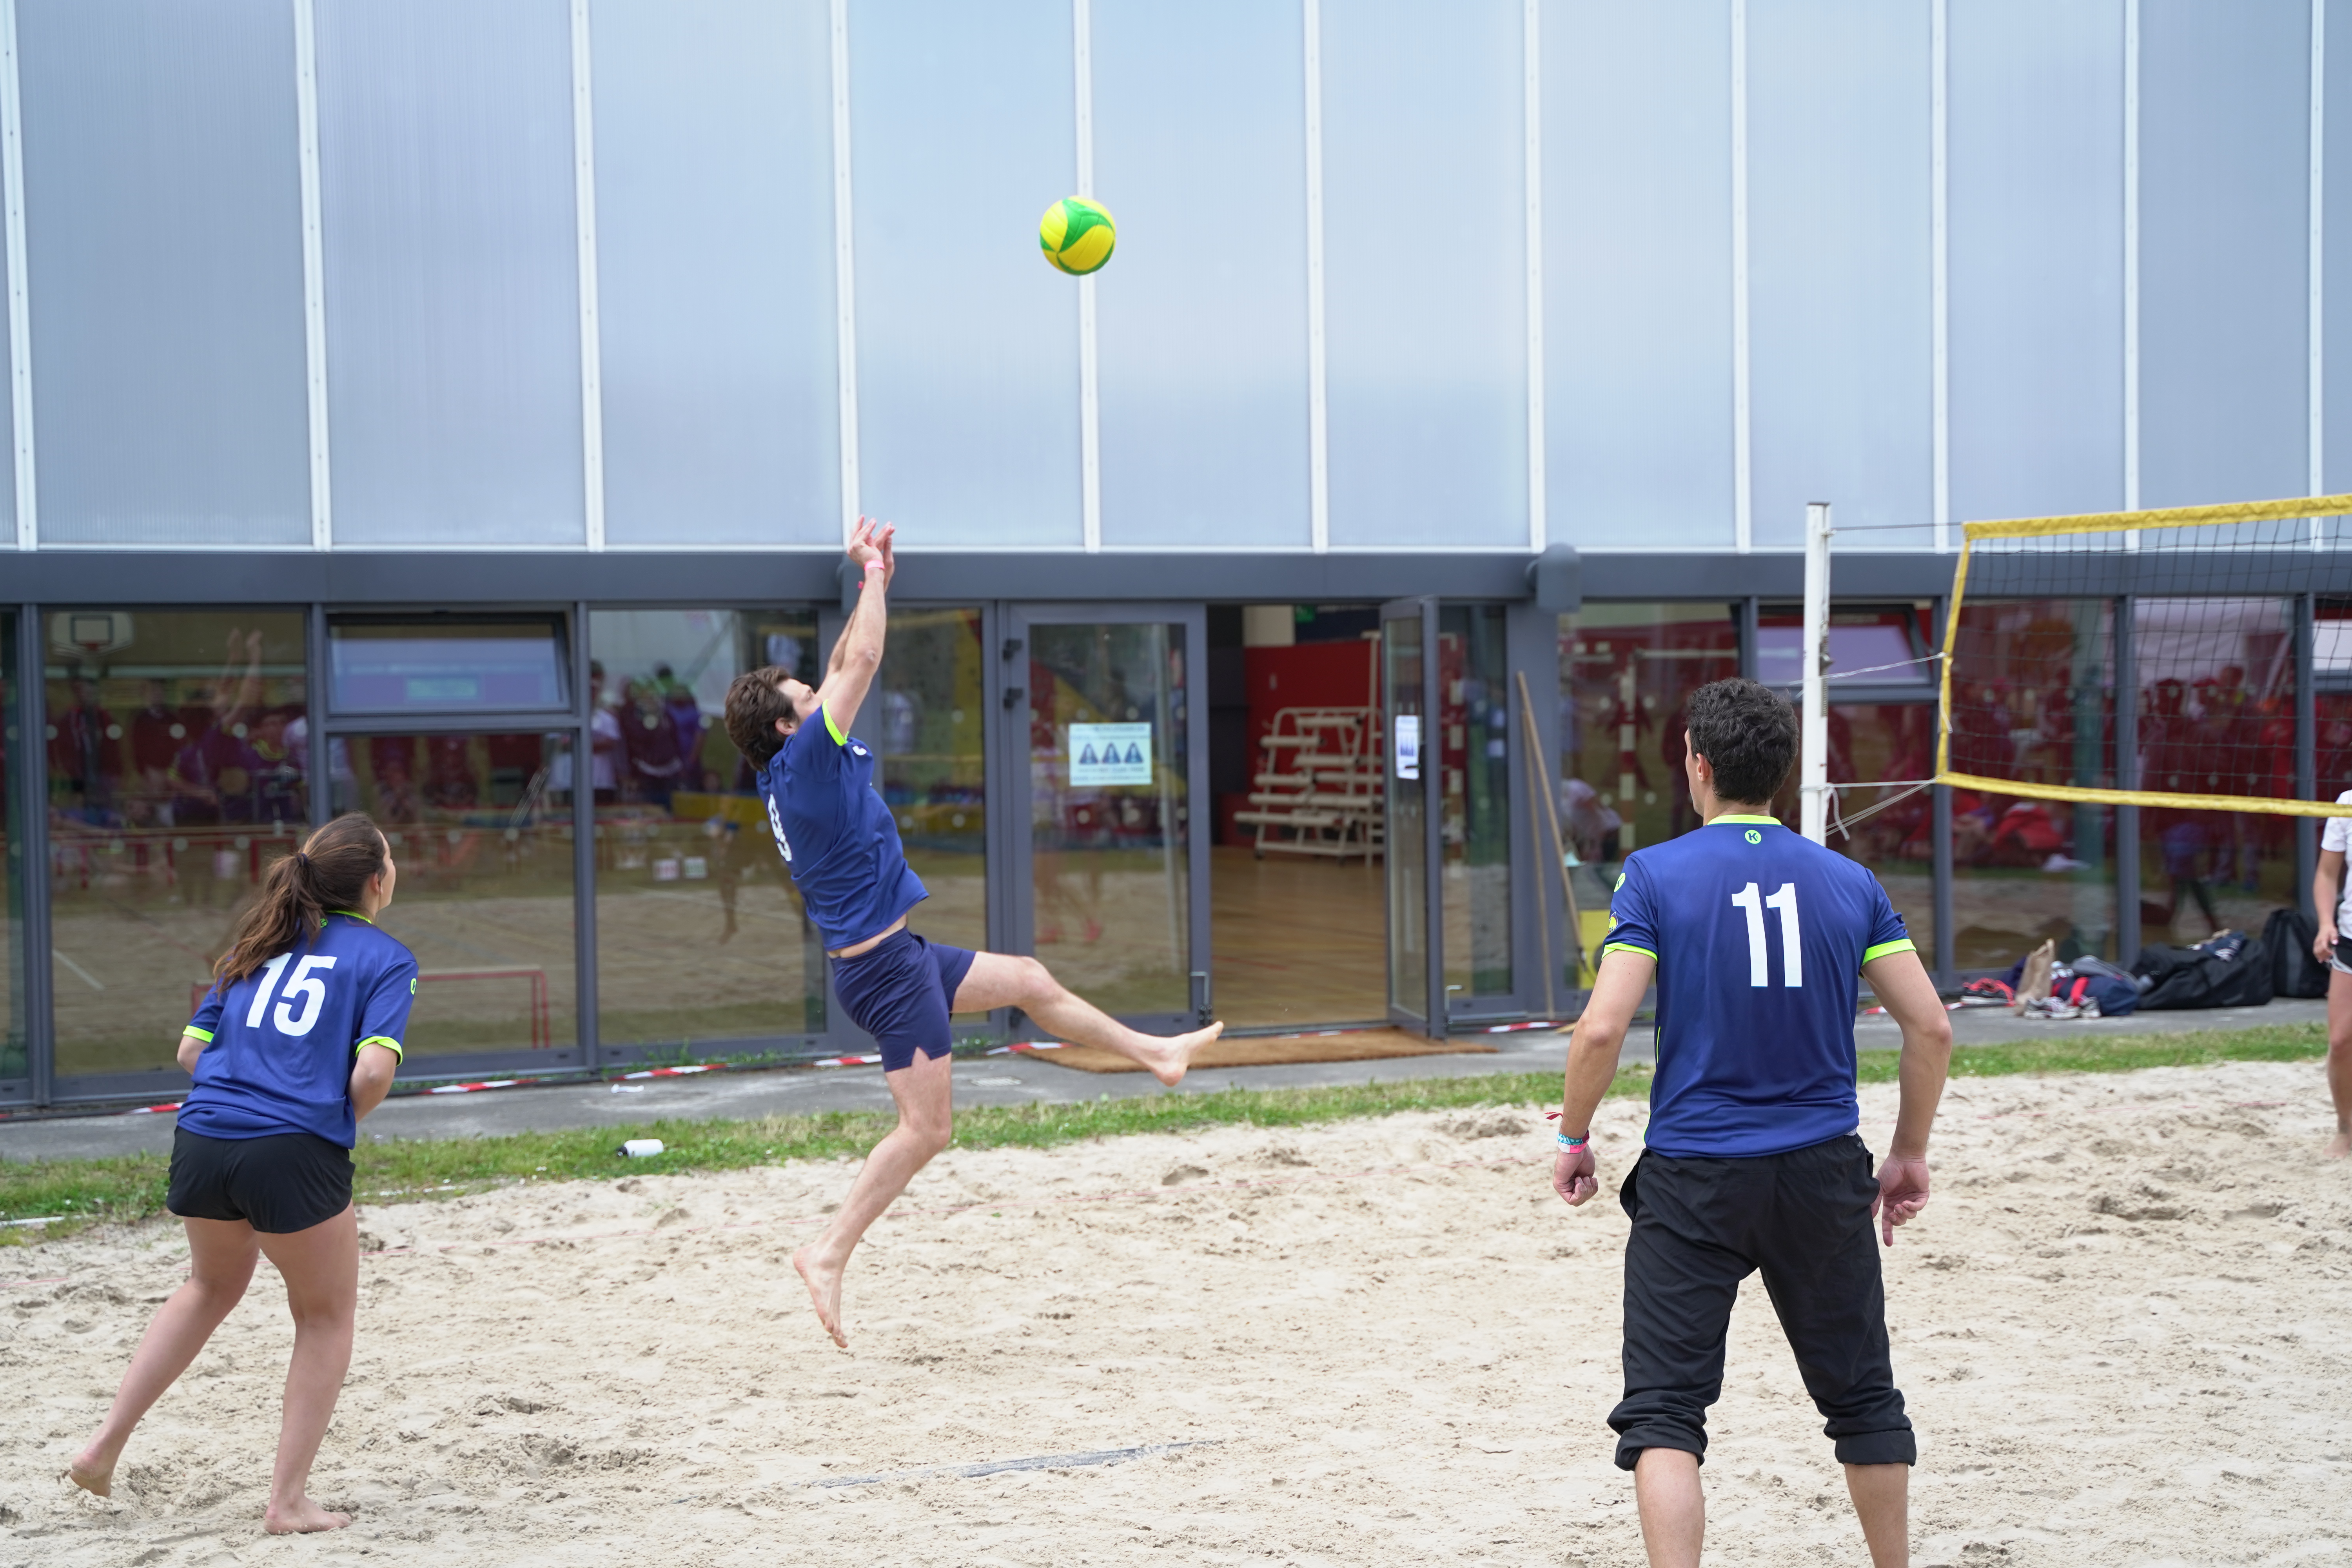 HEC took second in volleyball, with moves like this from Mattia Toboga